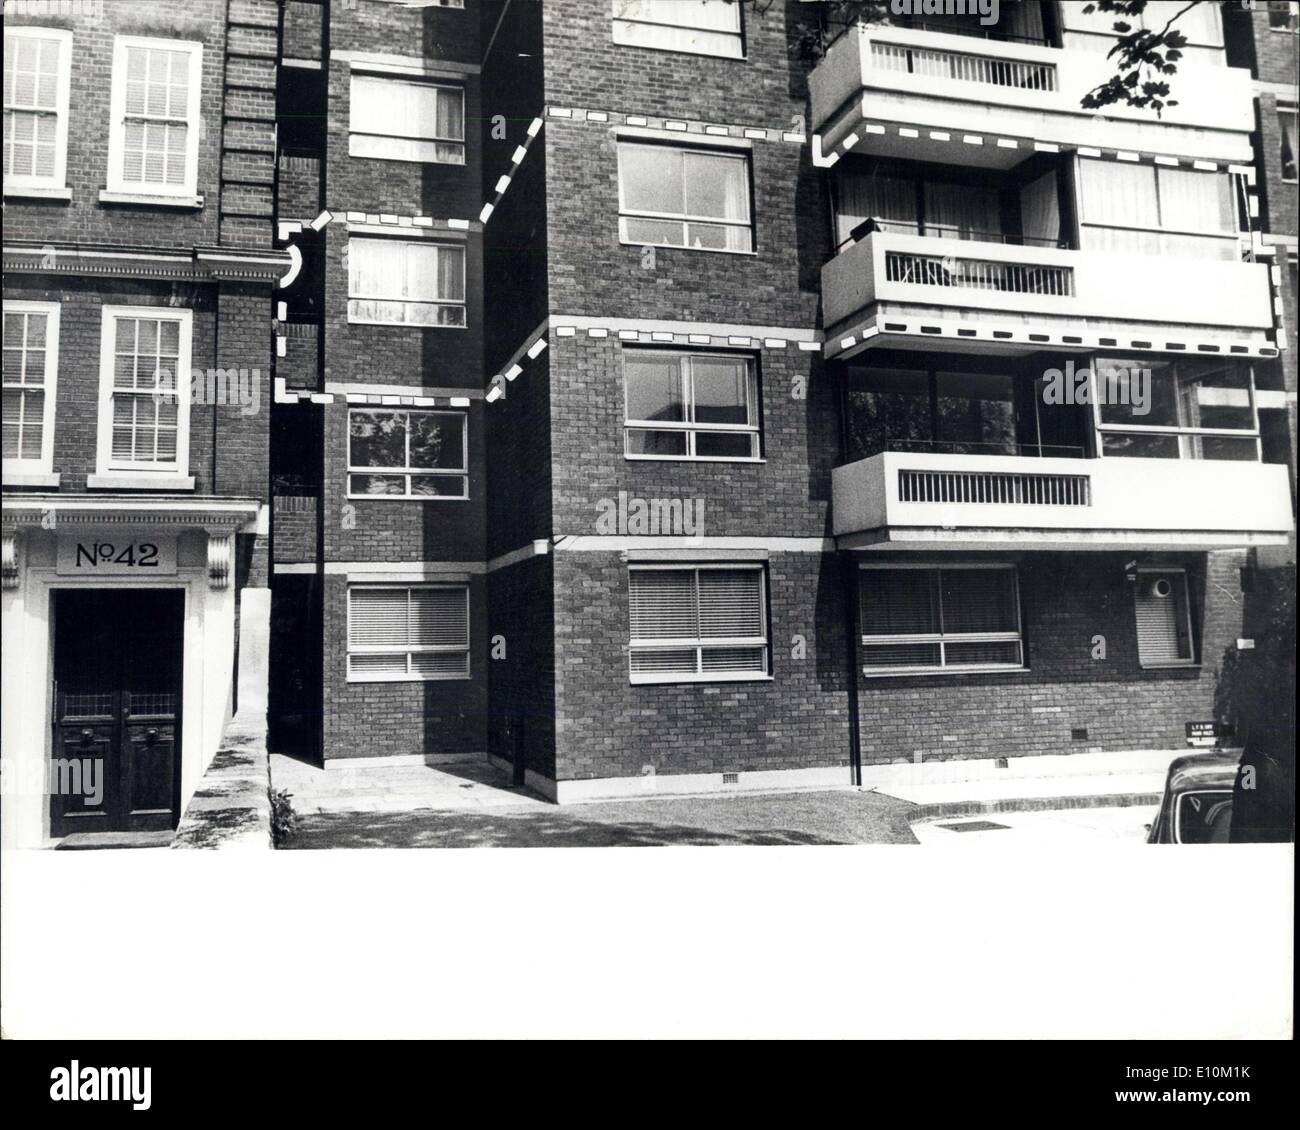 May 25, 1973 - THE LAMBTON AFFAIR. Men calling on Nora Levy, the woman linked with Lord Lambton's resignation as Defence under Secretary for the R.A.F, were in full view of staff of the Chinese Embassy when they visited her flat, where Lord Lambton was secretly photographed. The building in Maida Vale where the flat is situated adjoins a six-storey black used as a residence for embassy staff. PHOTO SHOWS: The second floor flat in Maida Vale where Mrs Hanora Levy, the woman linked with Lord Lambton, had been living until she disappeared within the past few days Stock Photo